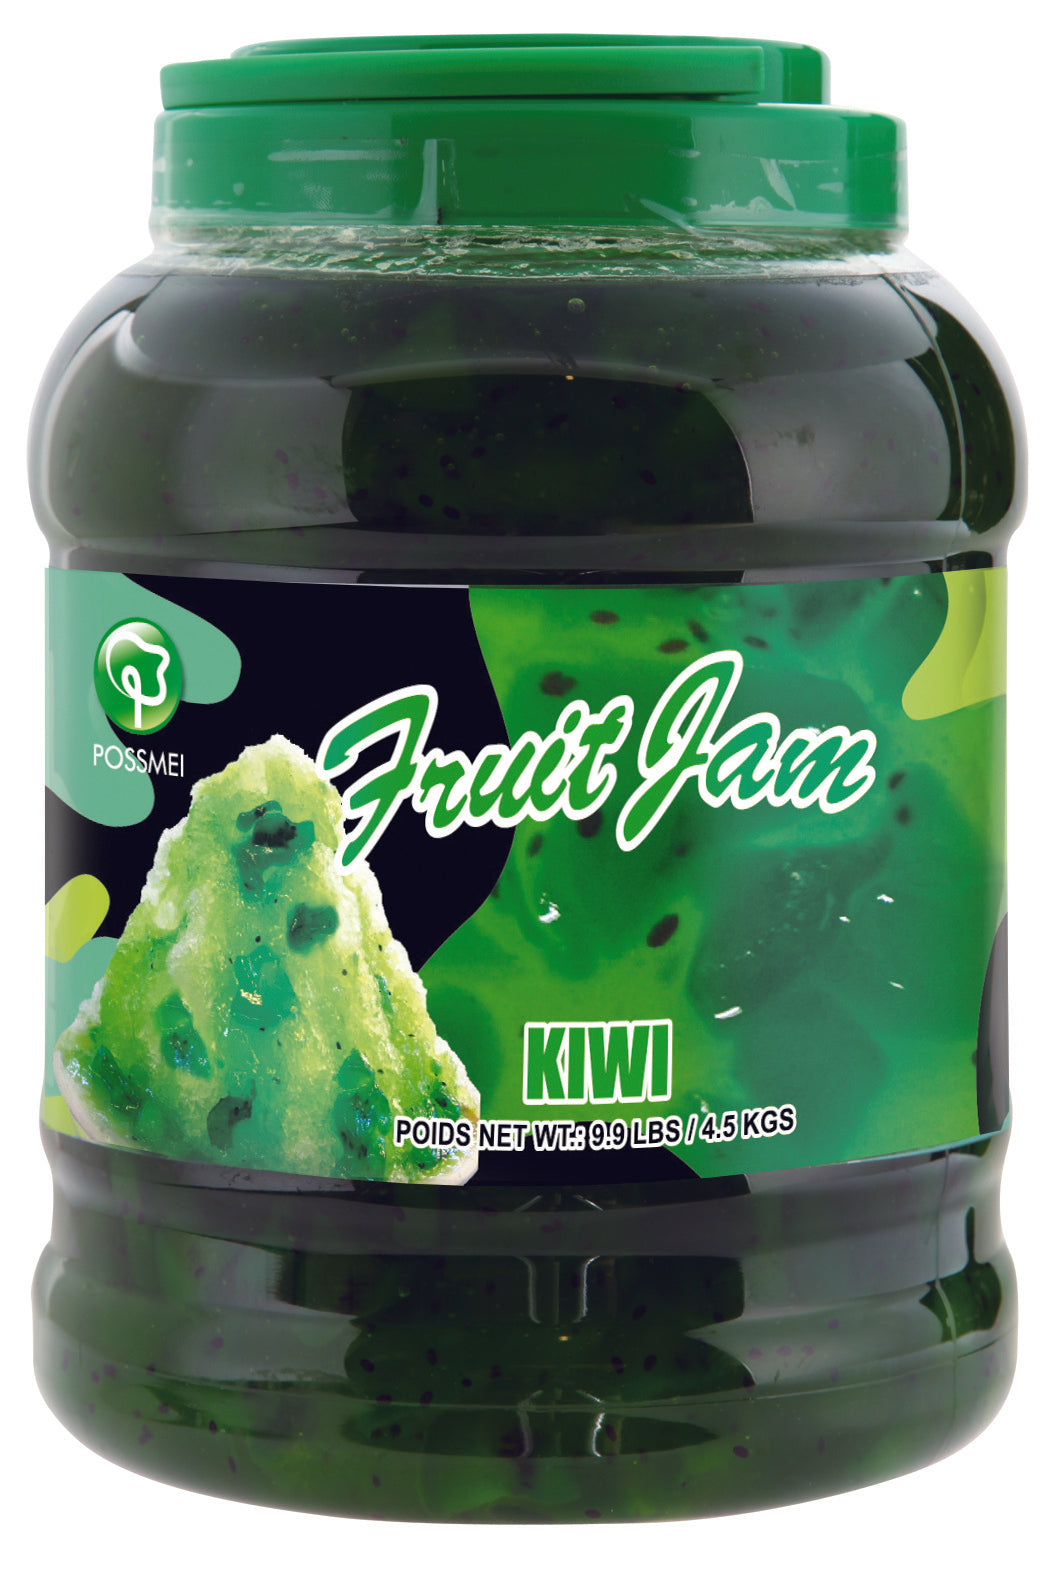 Possmei Kiwi Concentrated Jam